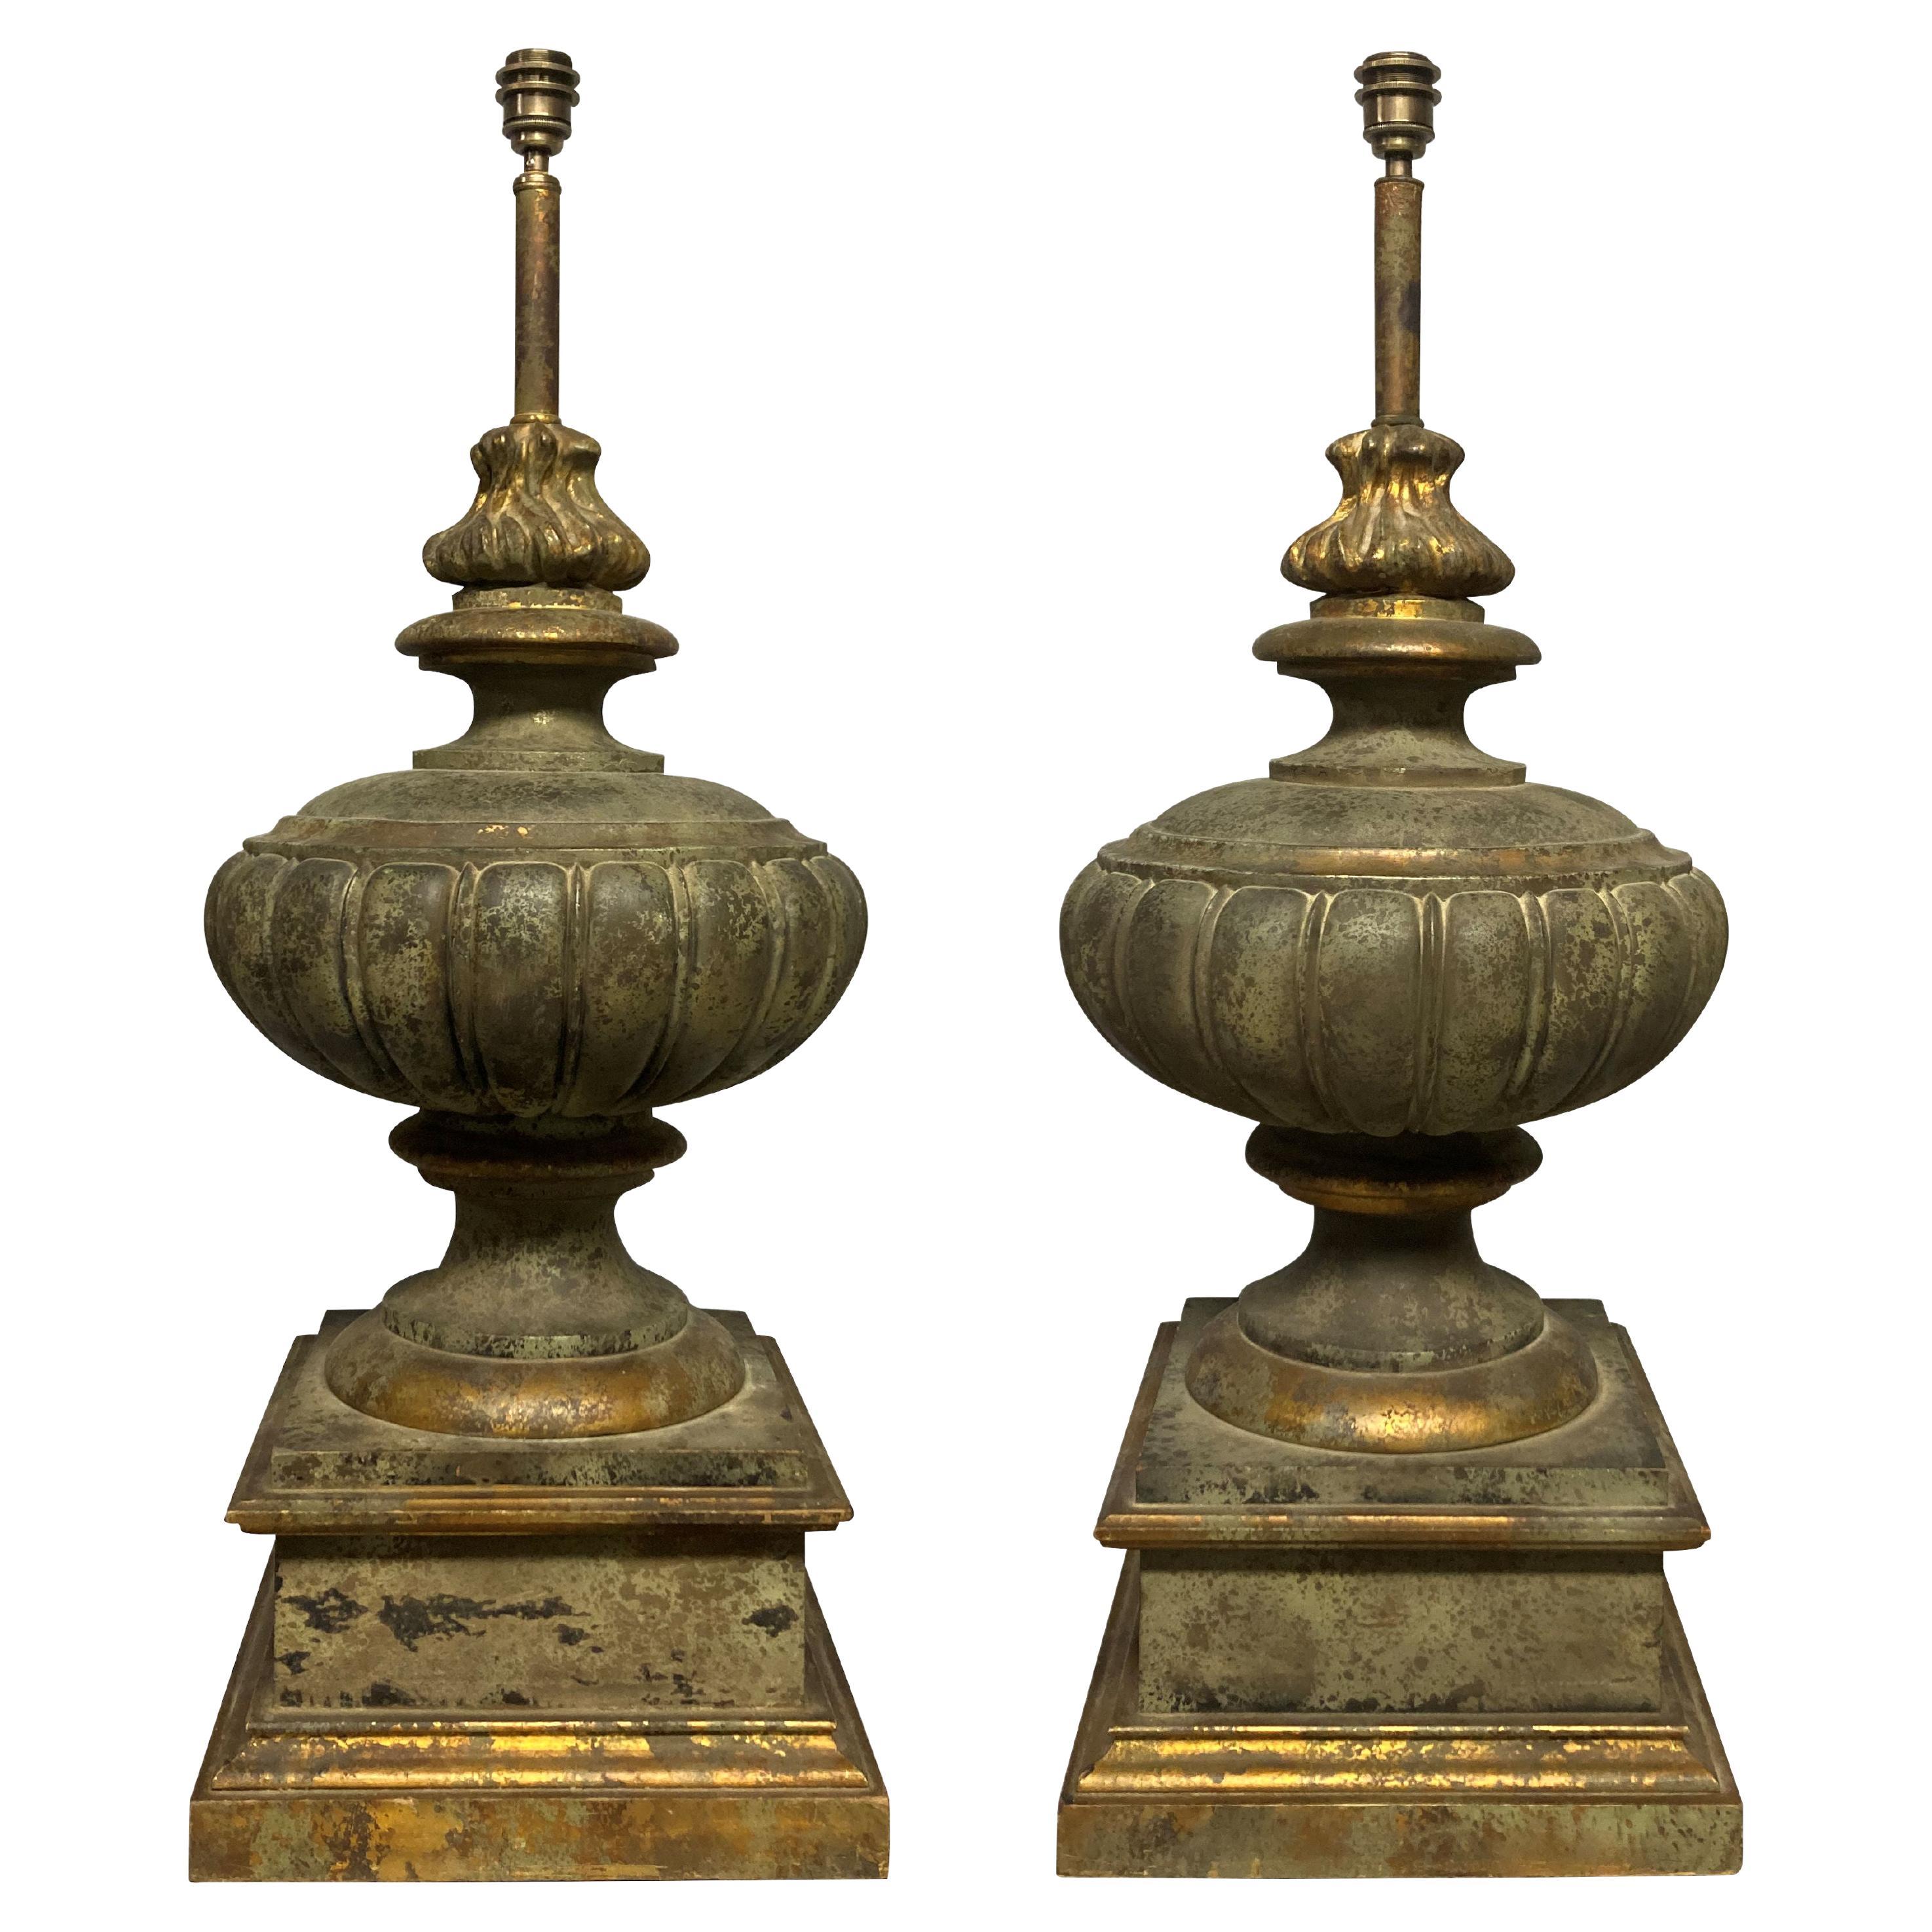 Pair of Large Faux Bronze Classical Urn Lamps